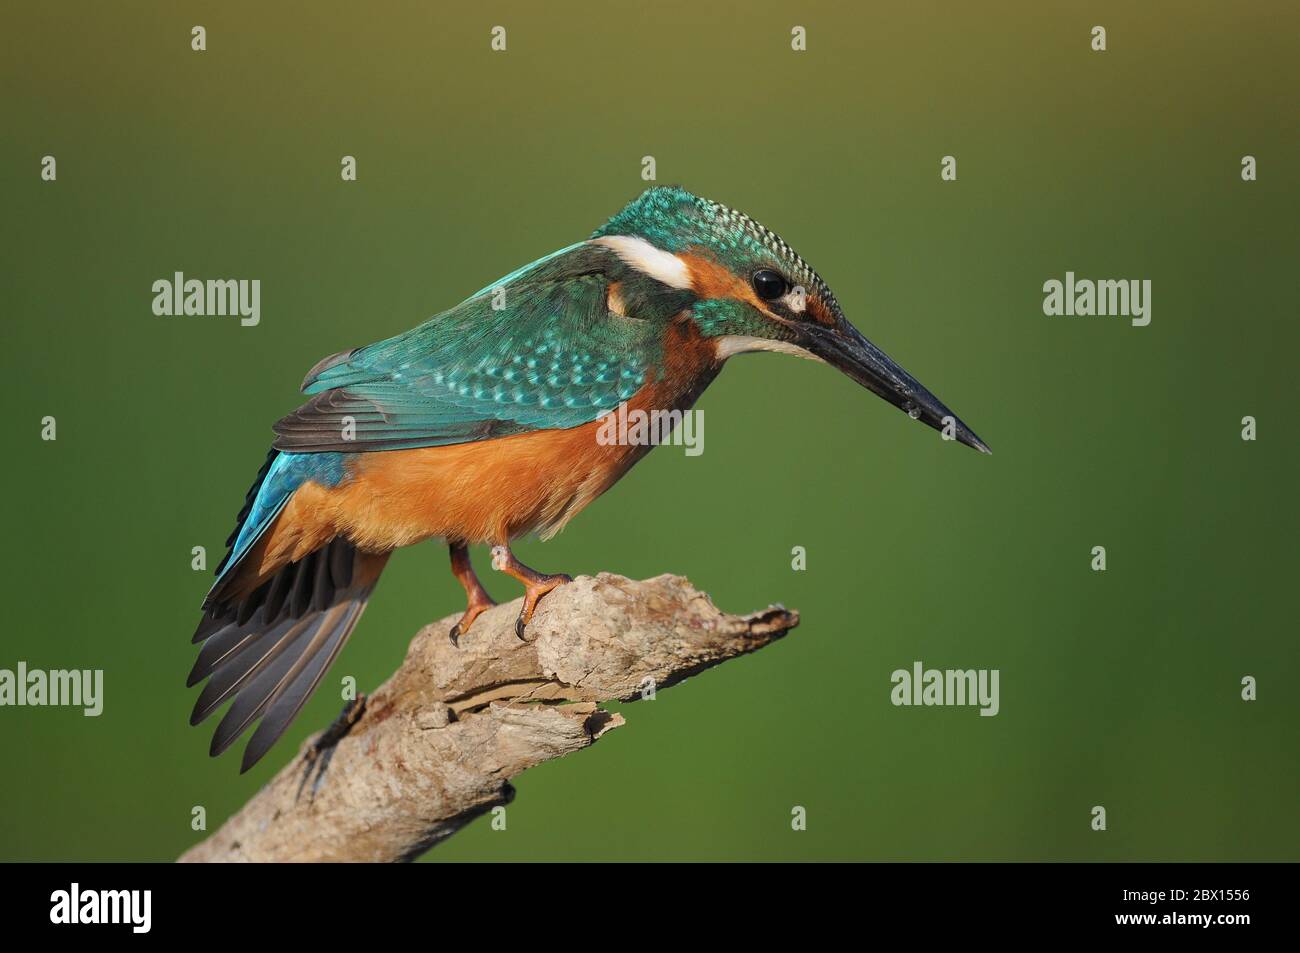 Common Kingfisher (Alcedo atthis) sitting on a beautiful green background. Stock Photo